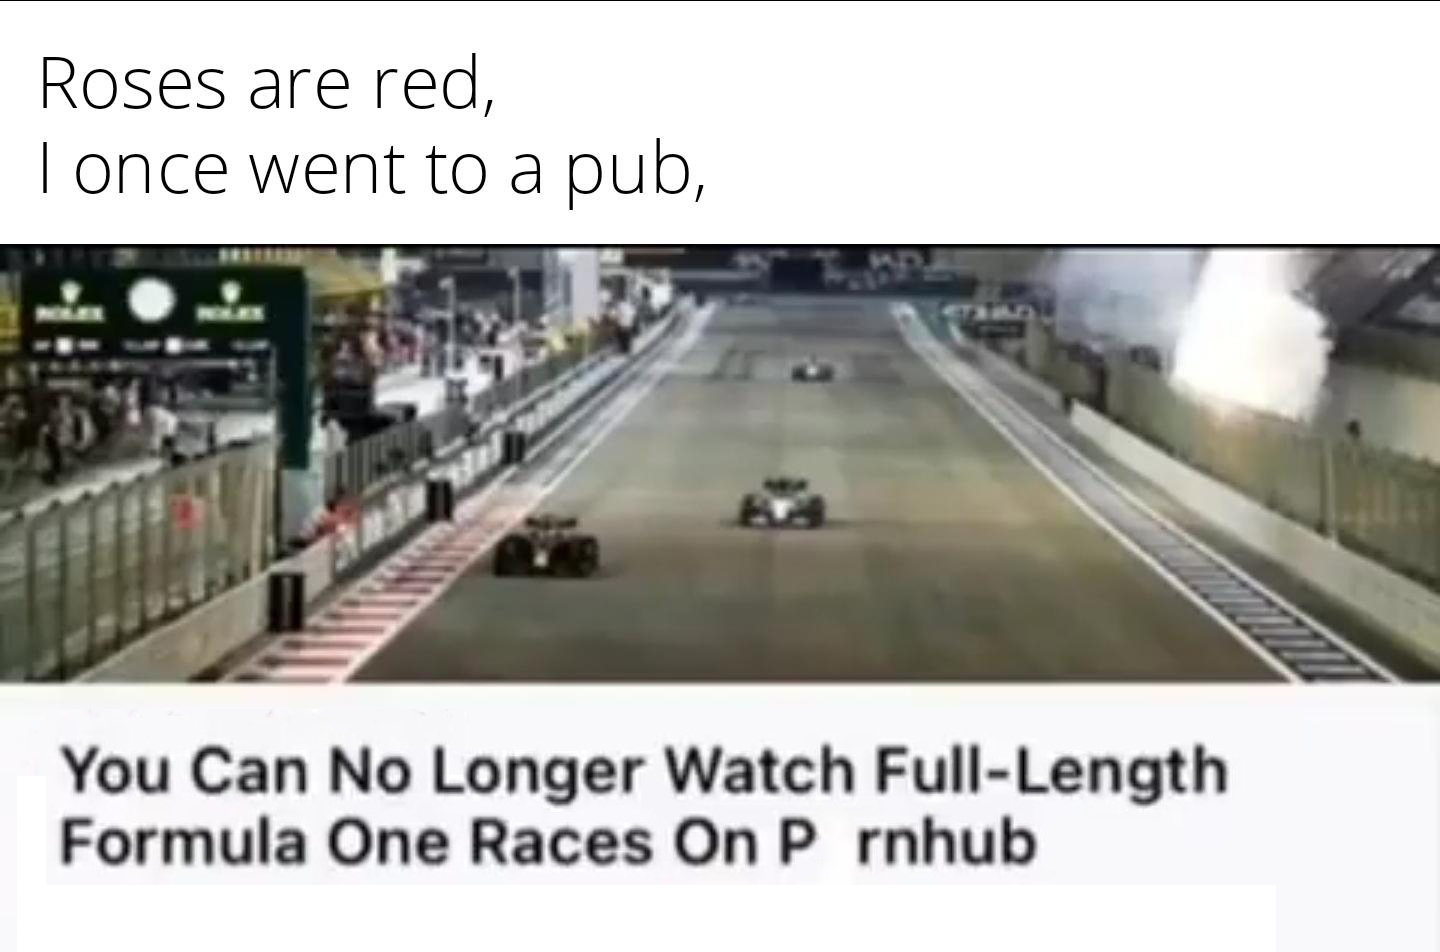 Abu Dhabi Grand Prix - Roses are red, I once went to a pub, You Can No Longer Watch FullLength Formula One Races On P rnhub